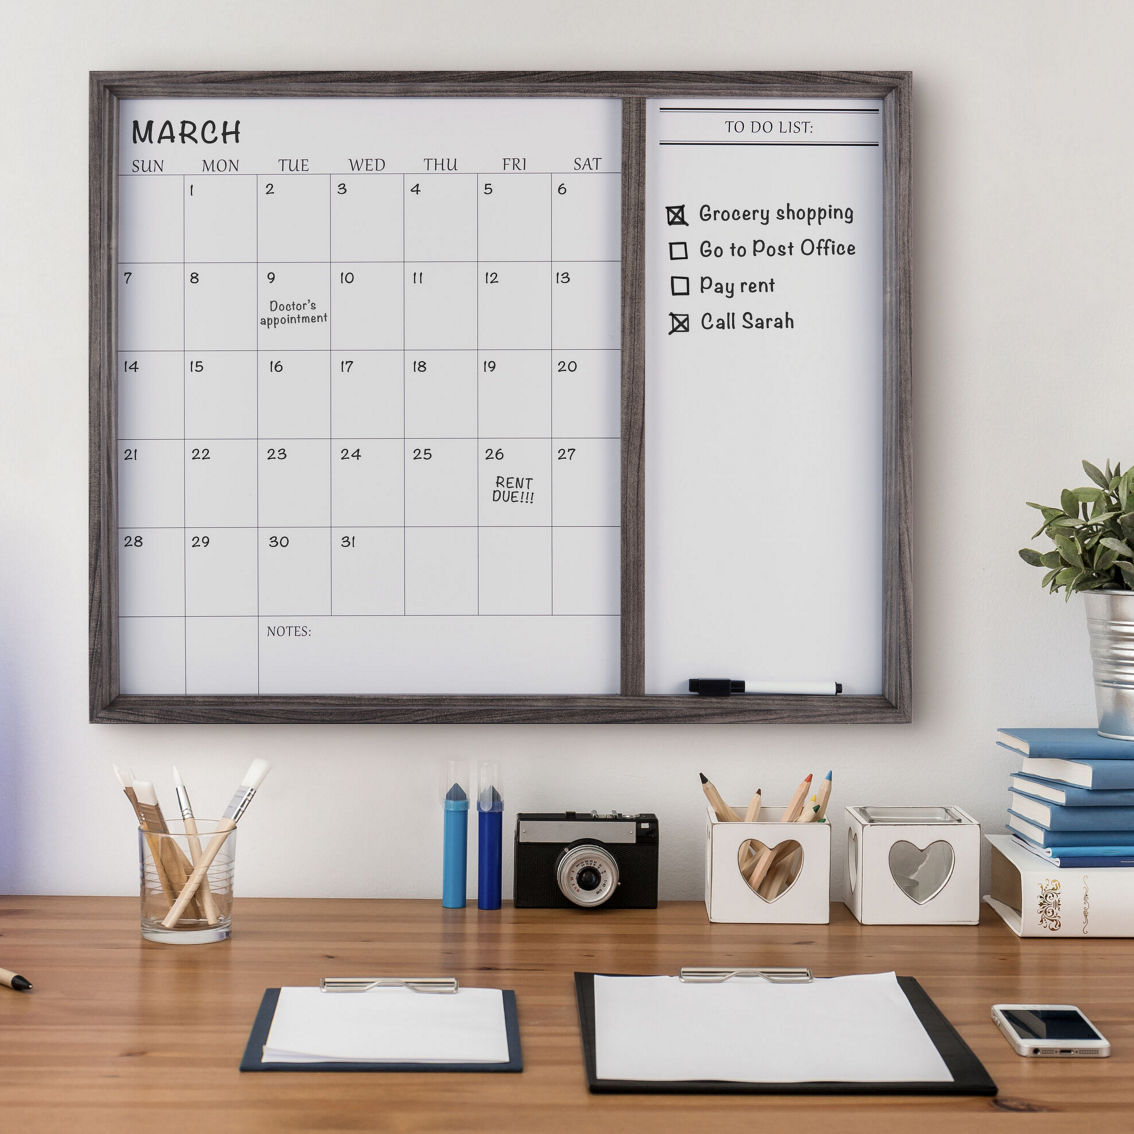 Towle Living 24 x 19 in. Whiteboard Calendar and To-Do Combo - Image 3 of 5